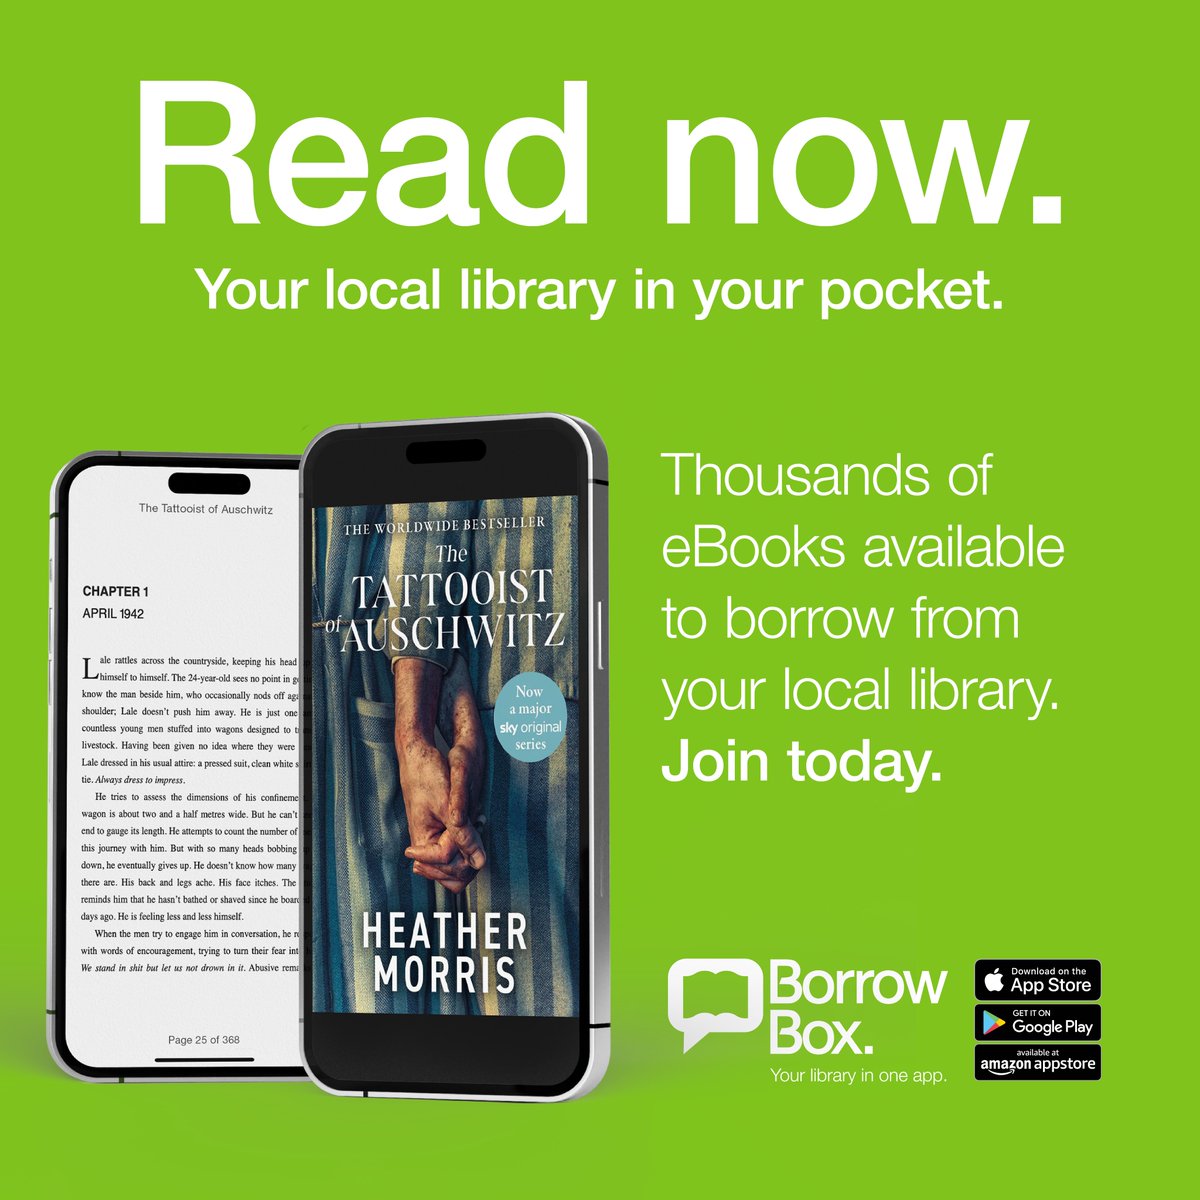 Staff-pick Saturday - Book Club Edition! 📷 Every week we want to bring you a book that one of our staff wants to recommend. This week we have 'The Tattooist of Auschwitz' by Heather Morris. The eBook and eAudiobook versions are now available on our #Borrowbox app. #AlwaysOpen